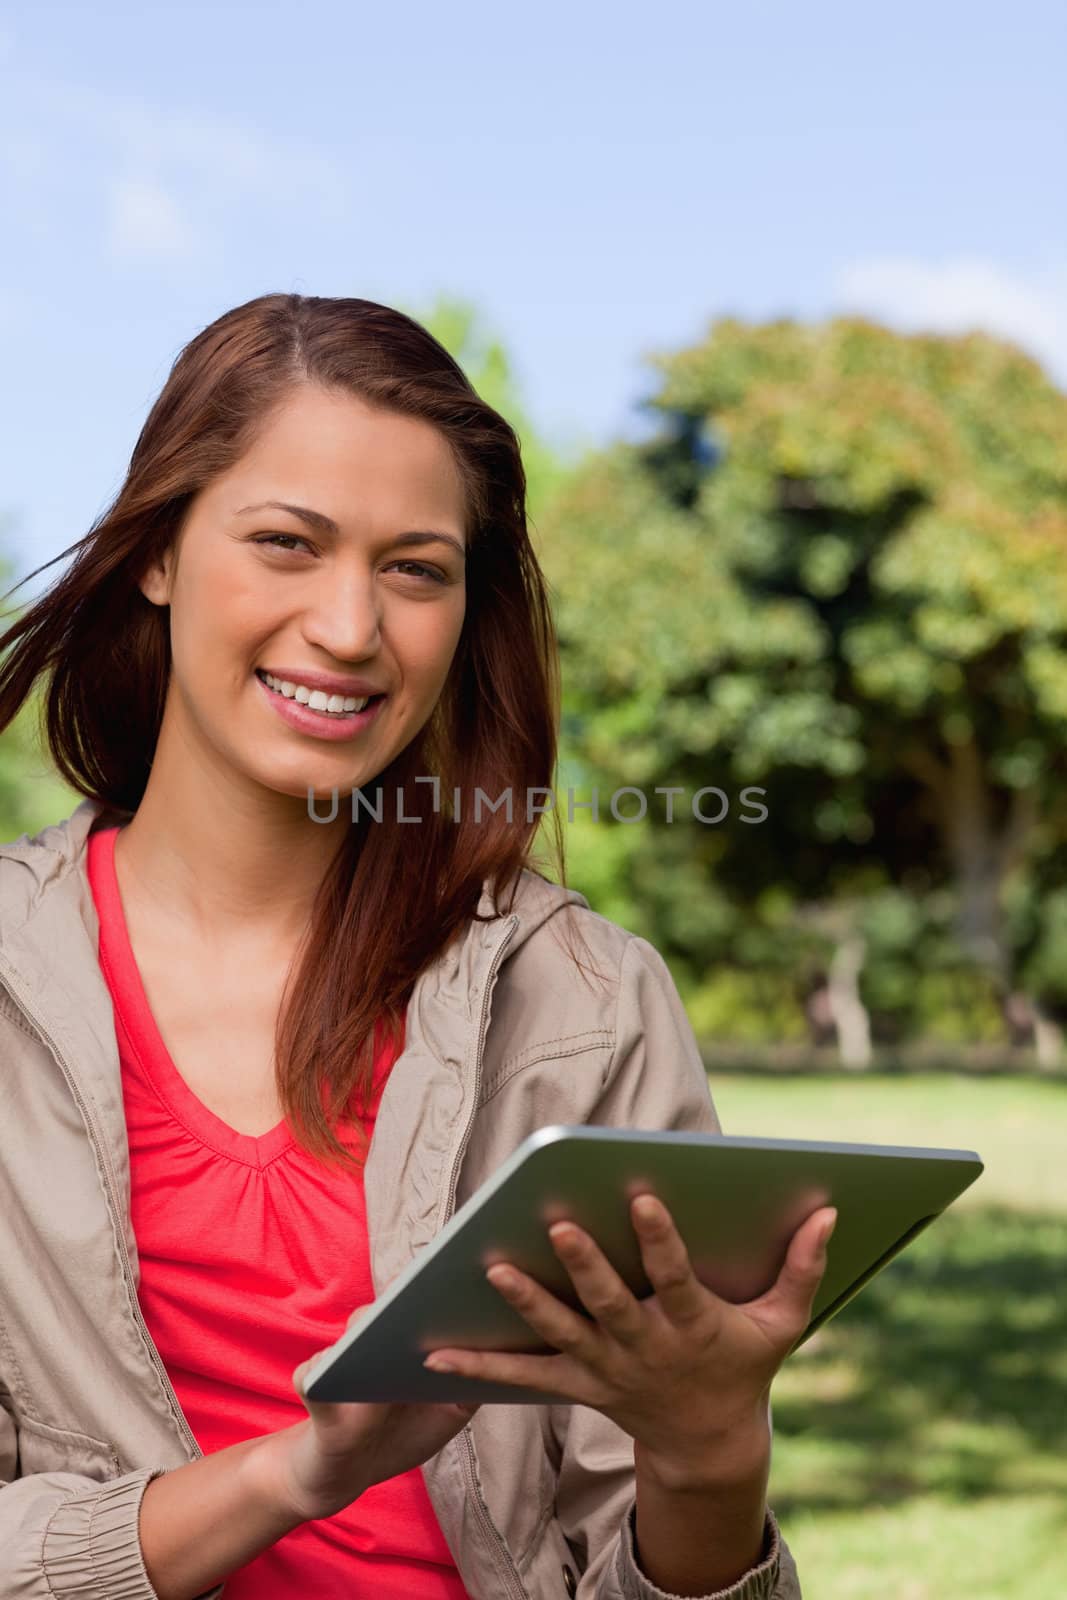 Young woman smiling and looking into the distance while she uses a tablet in a sunny park